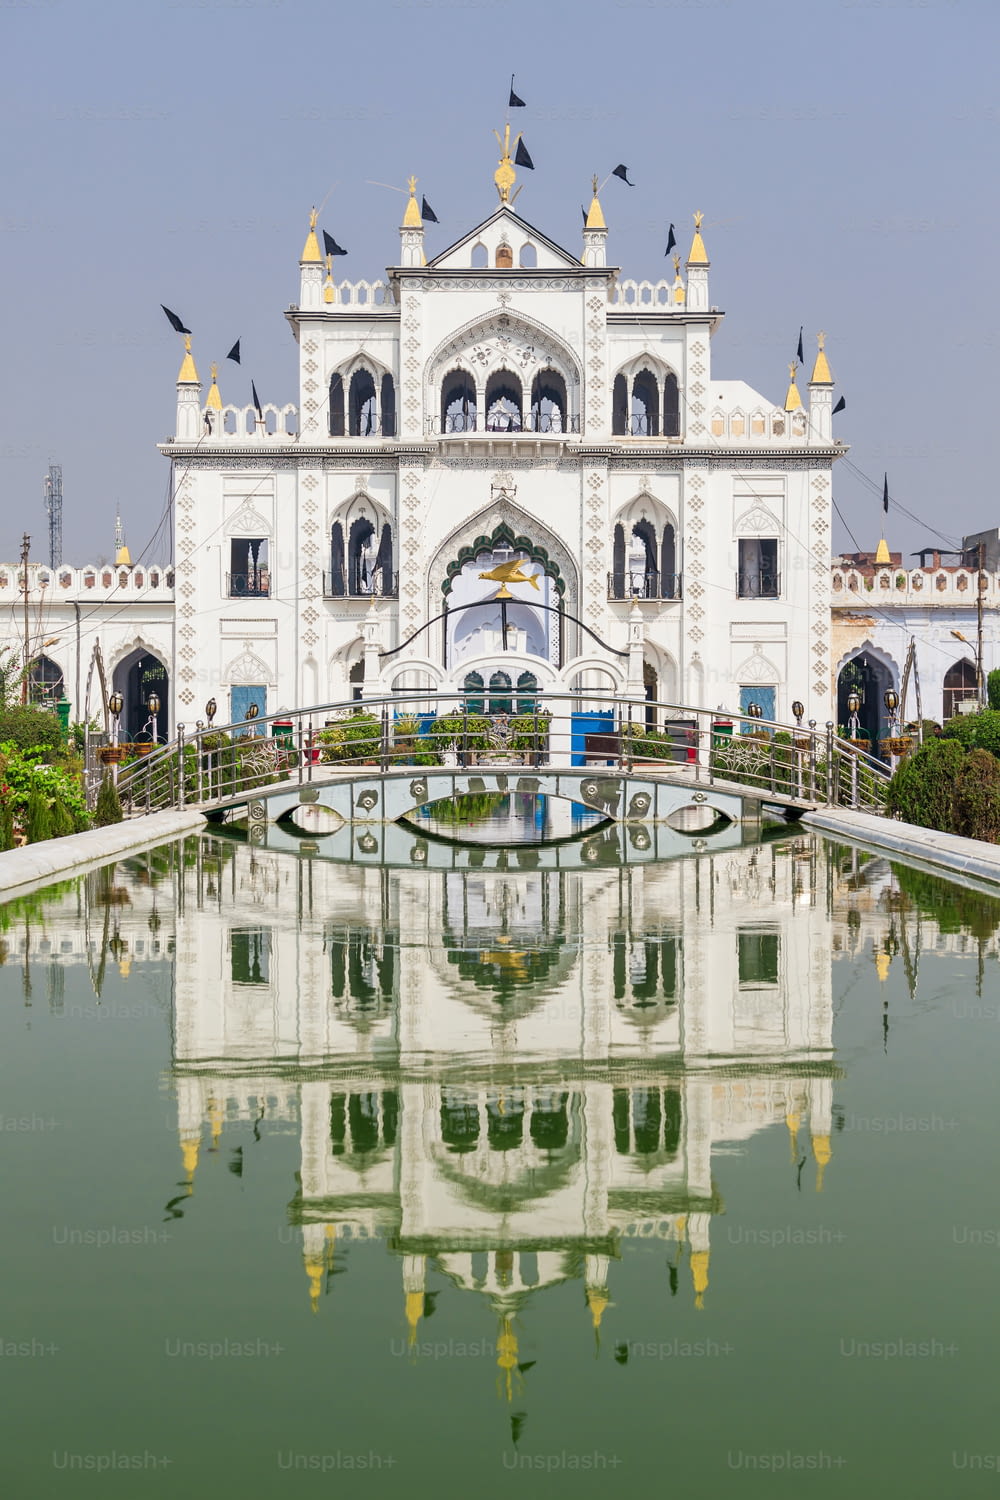 Chota Imambara, also known as Hussainabad Imambara is an imposing monument located in the city of Lucknow in Uttar Pradesh, India